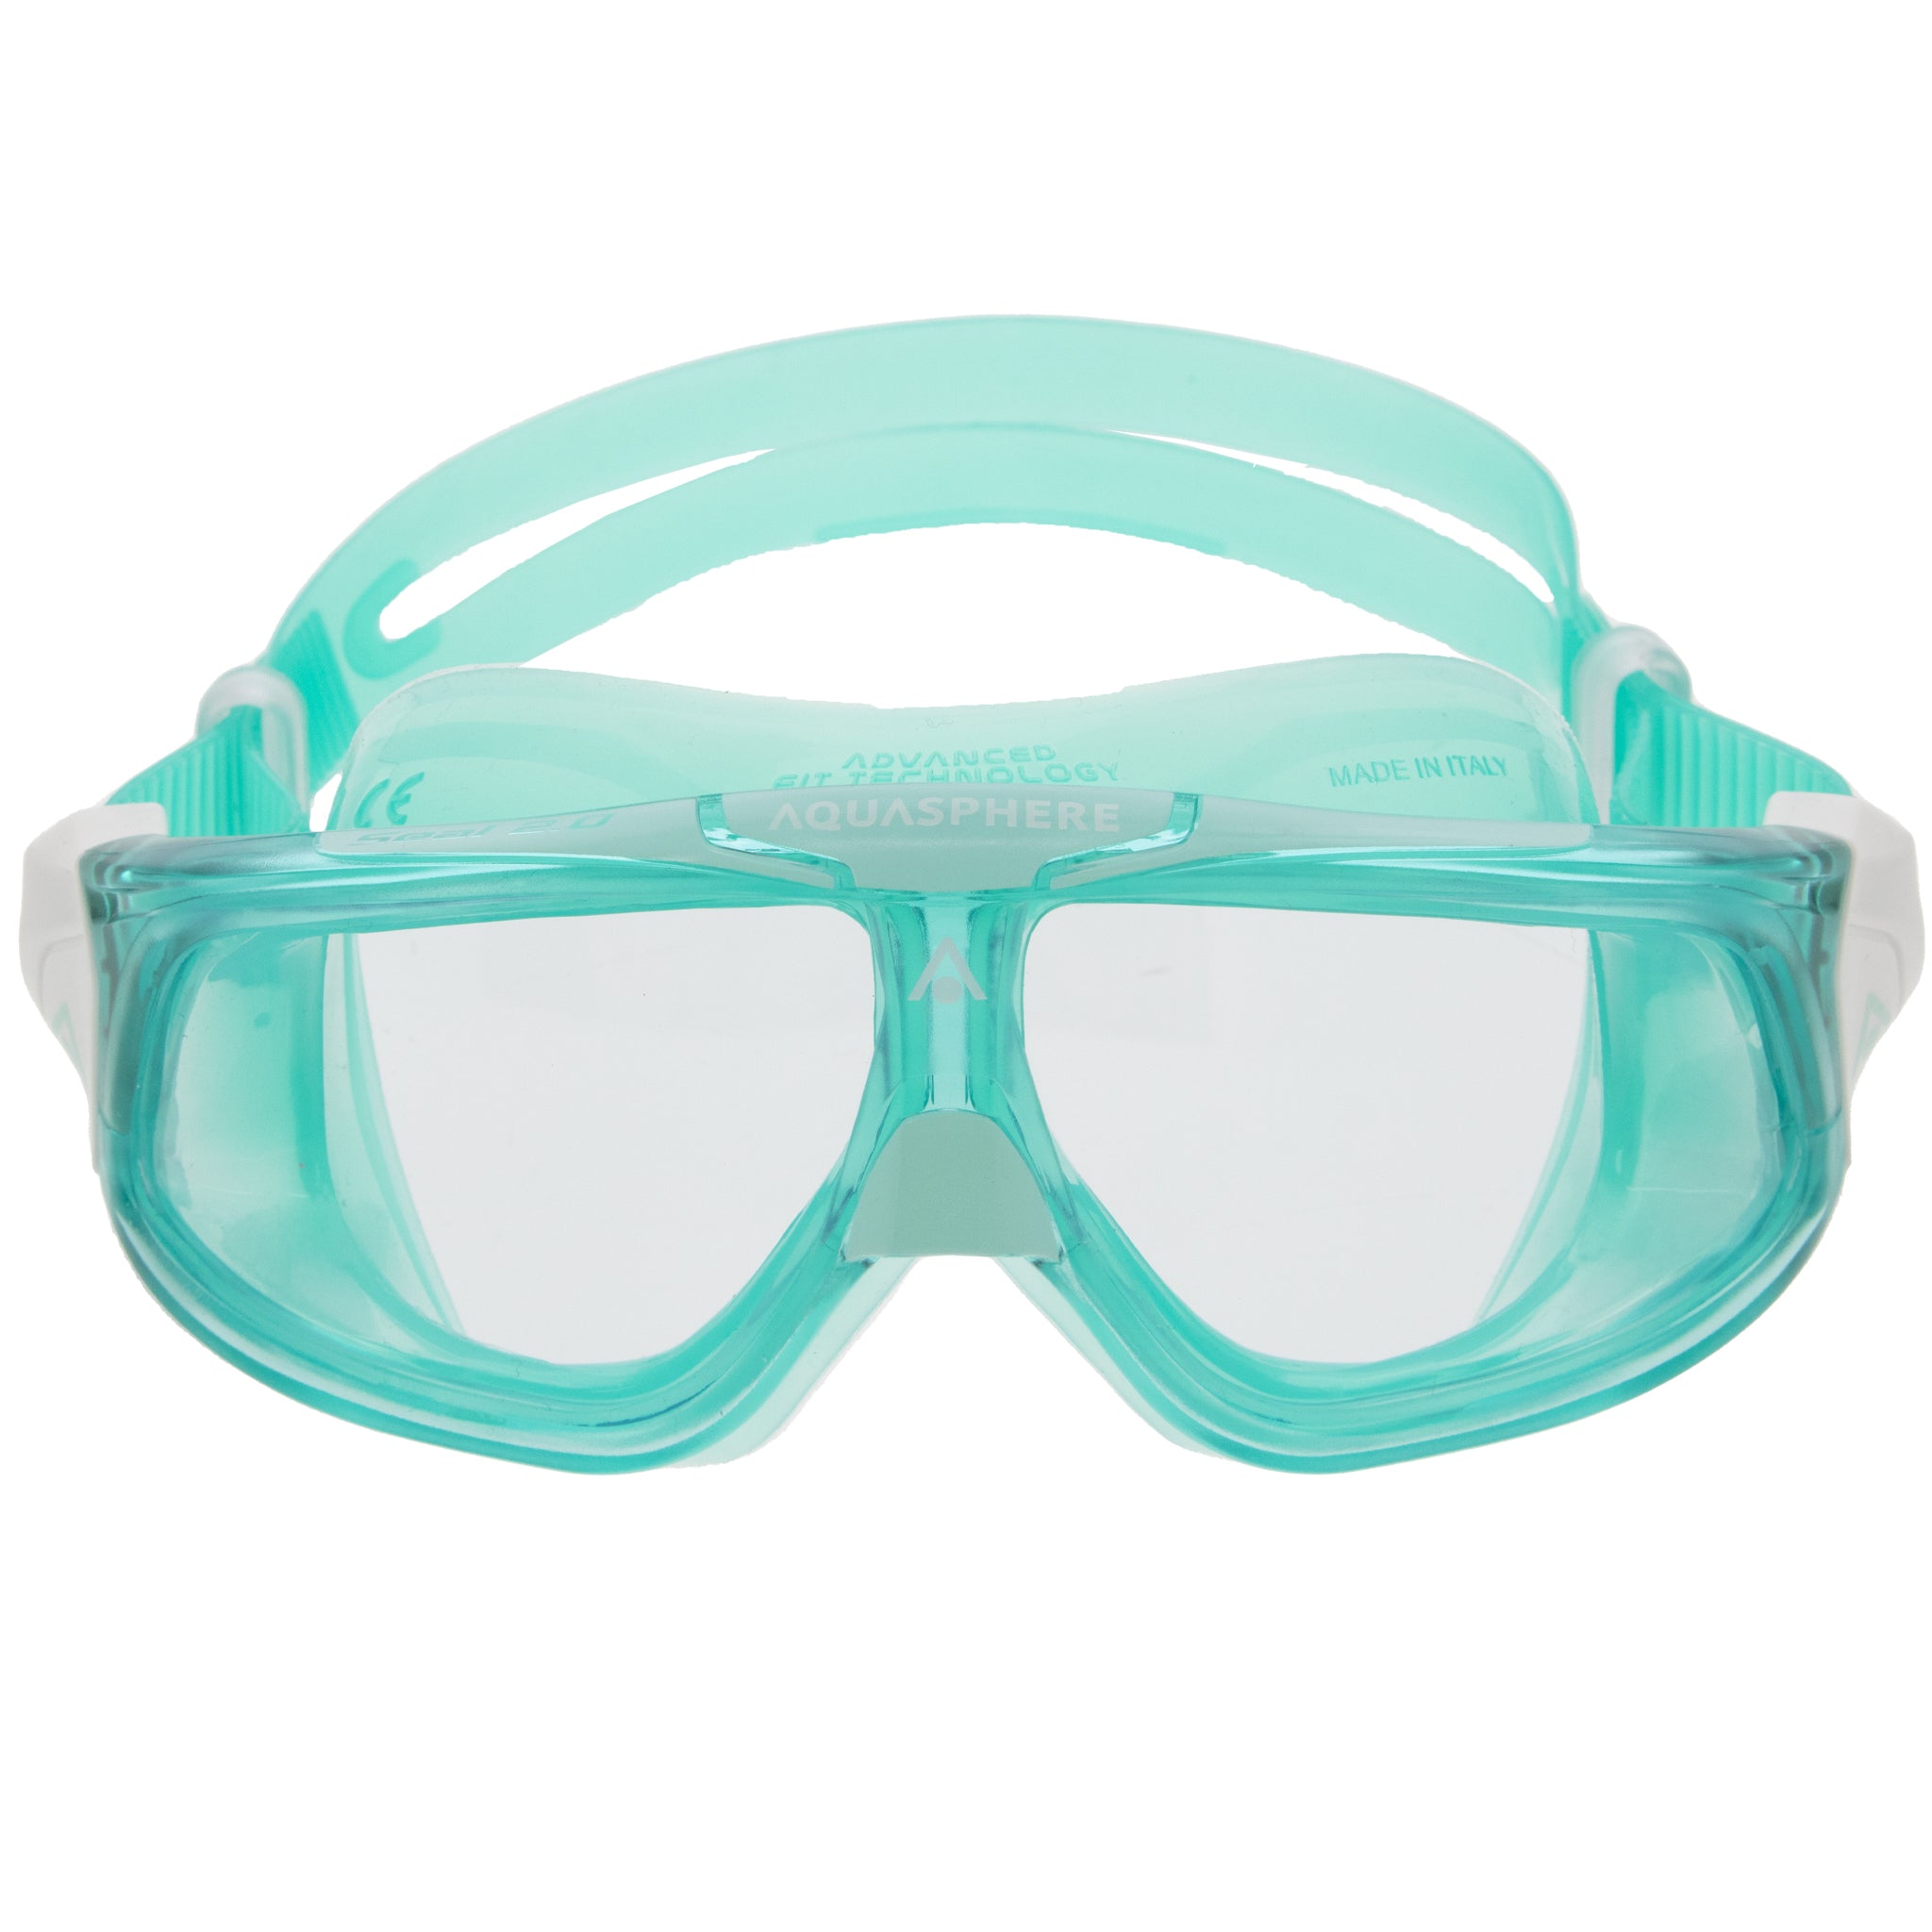 Aquasphere Seal 2.0 Swimming Mask Goggles Green Clear Lenses - Front